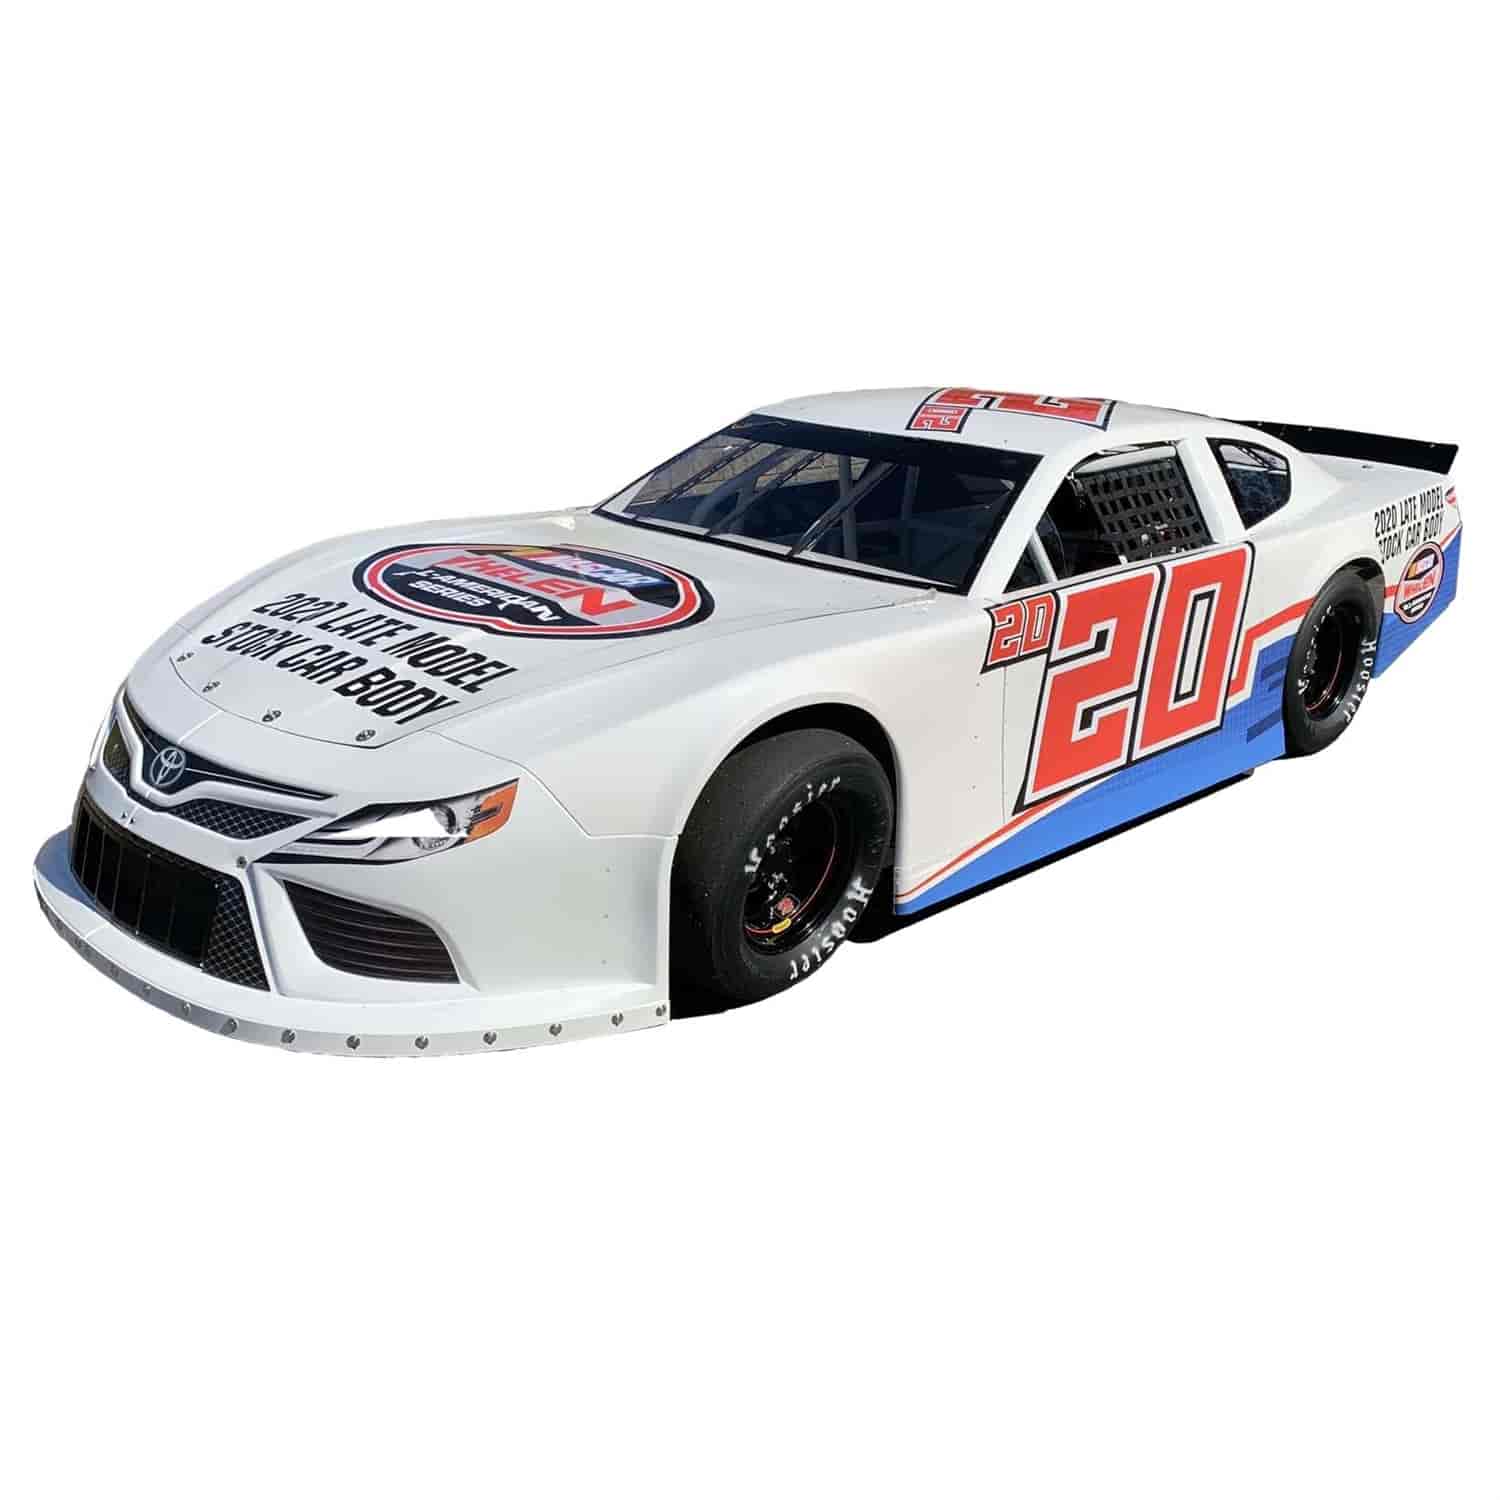 2020 LMSC Complete Body Package - Toyota Camry White